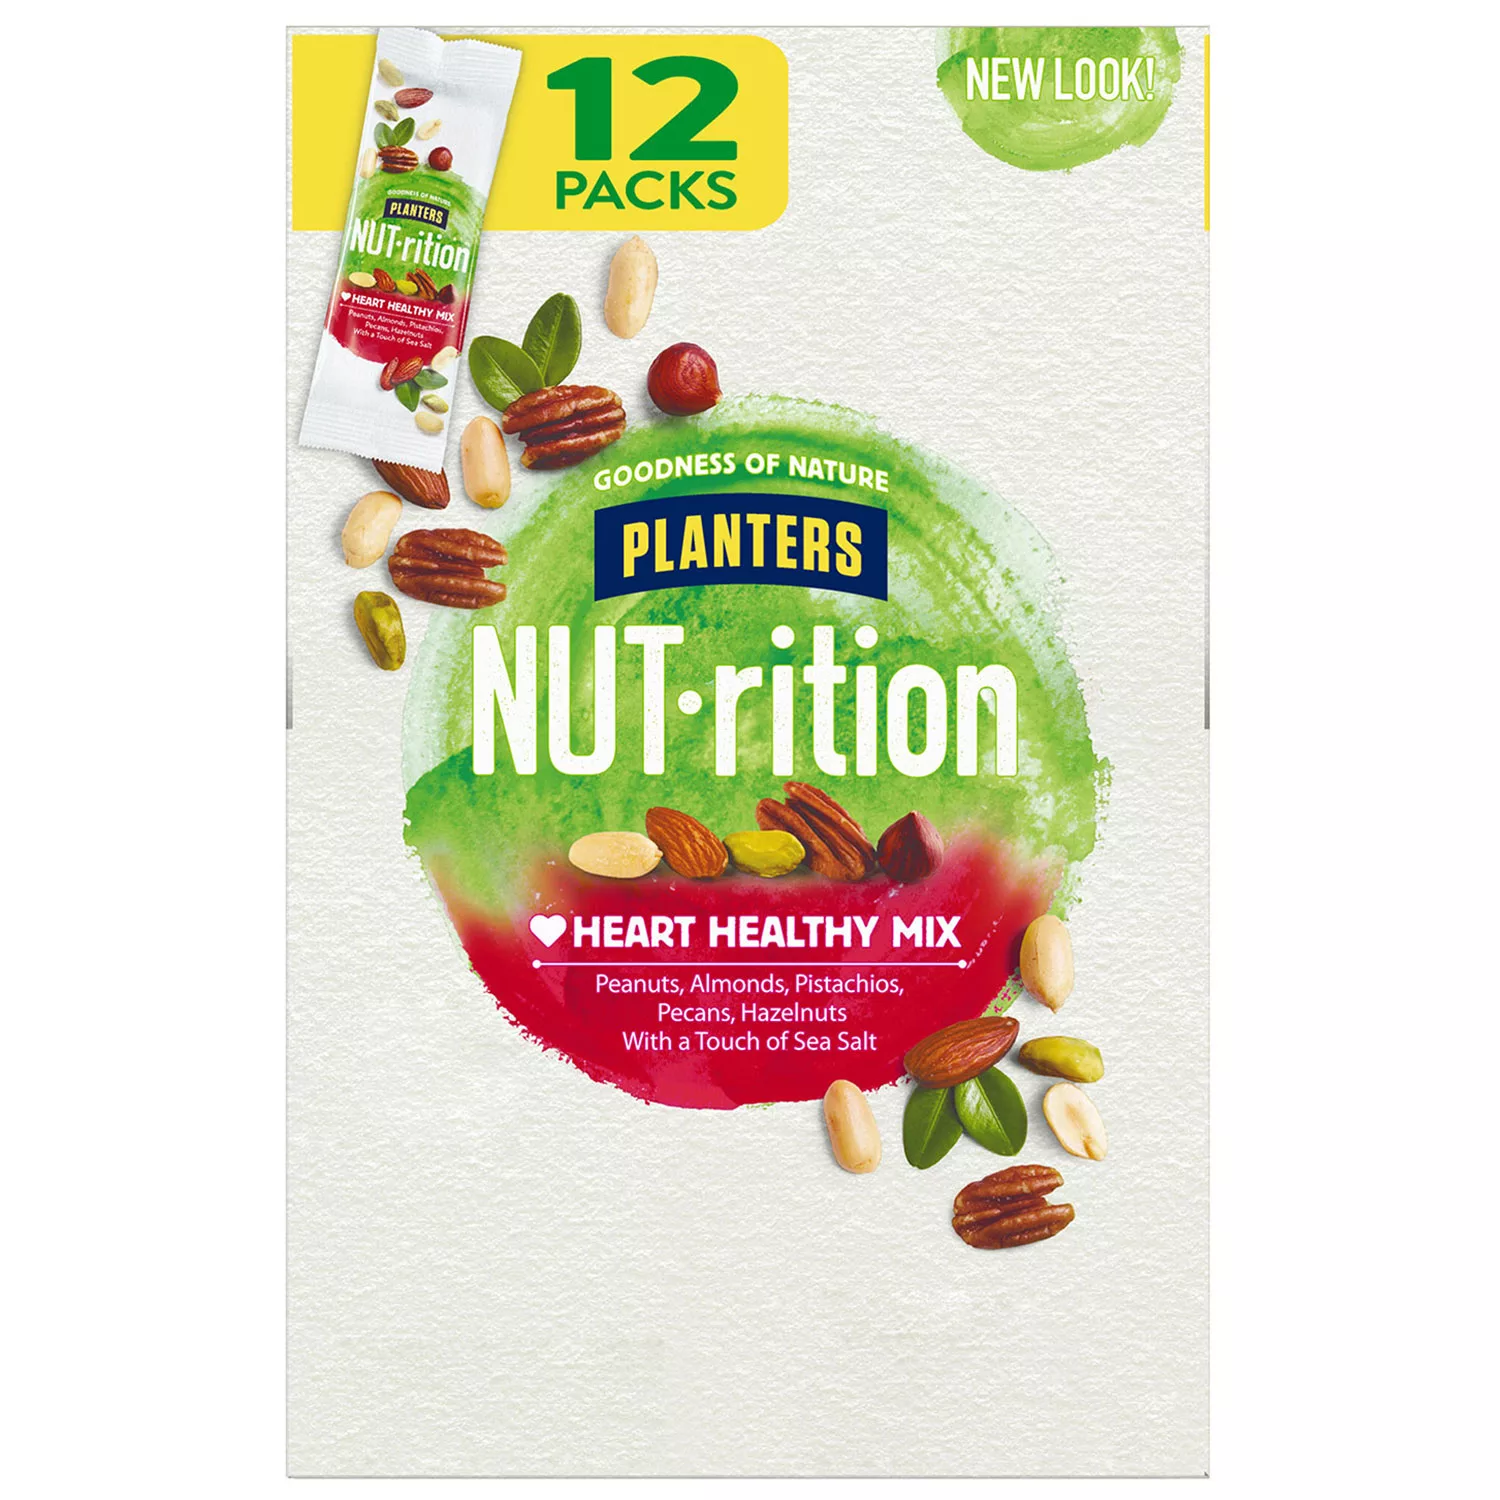 Planters NUT-rition Heart Healthy Nut Mix